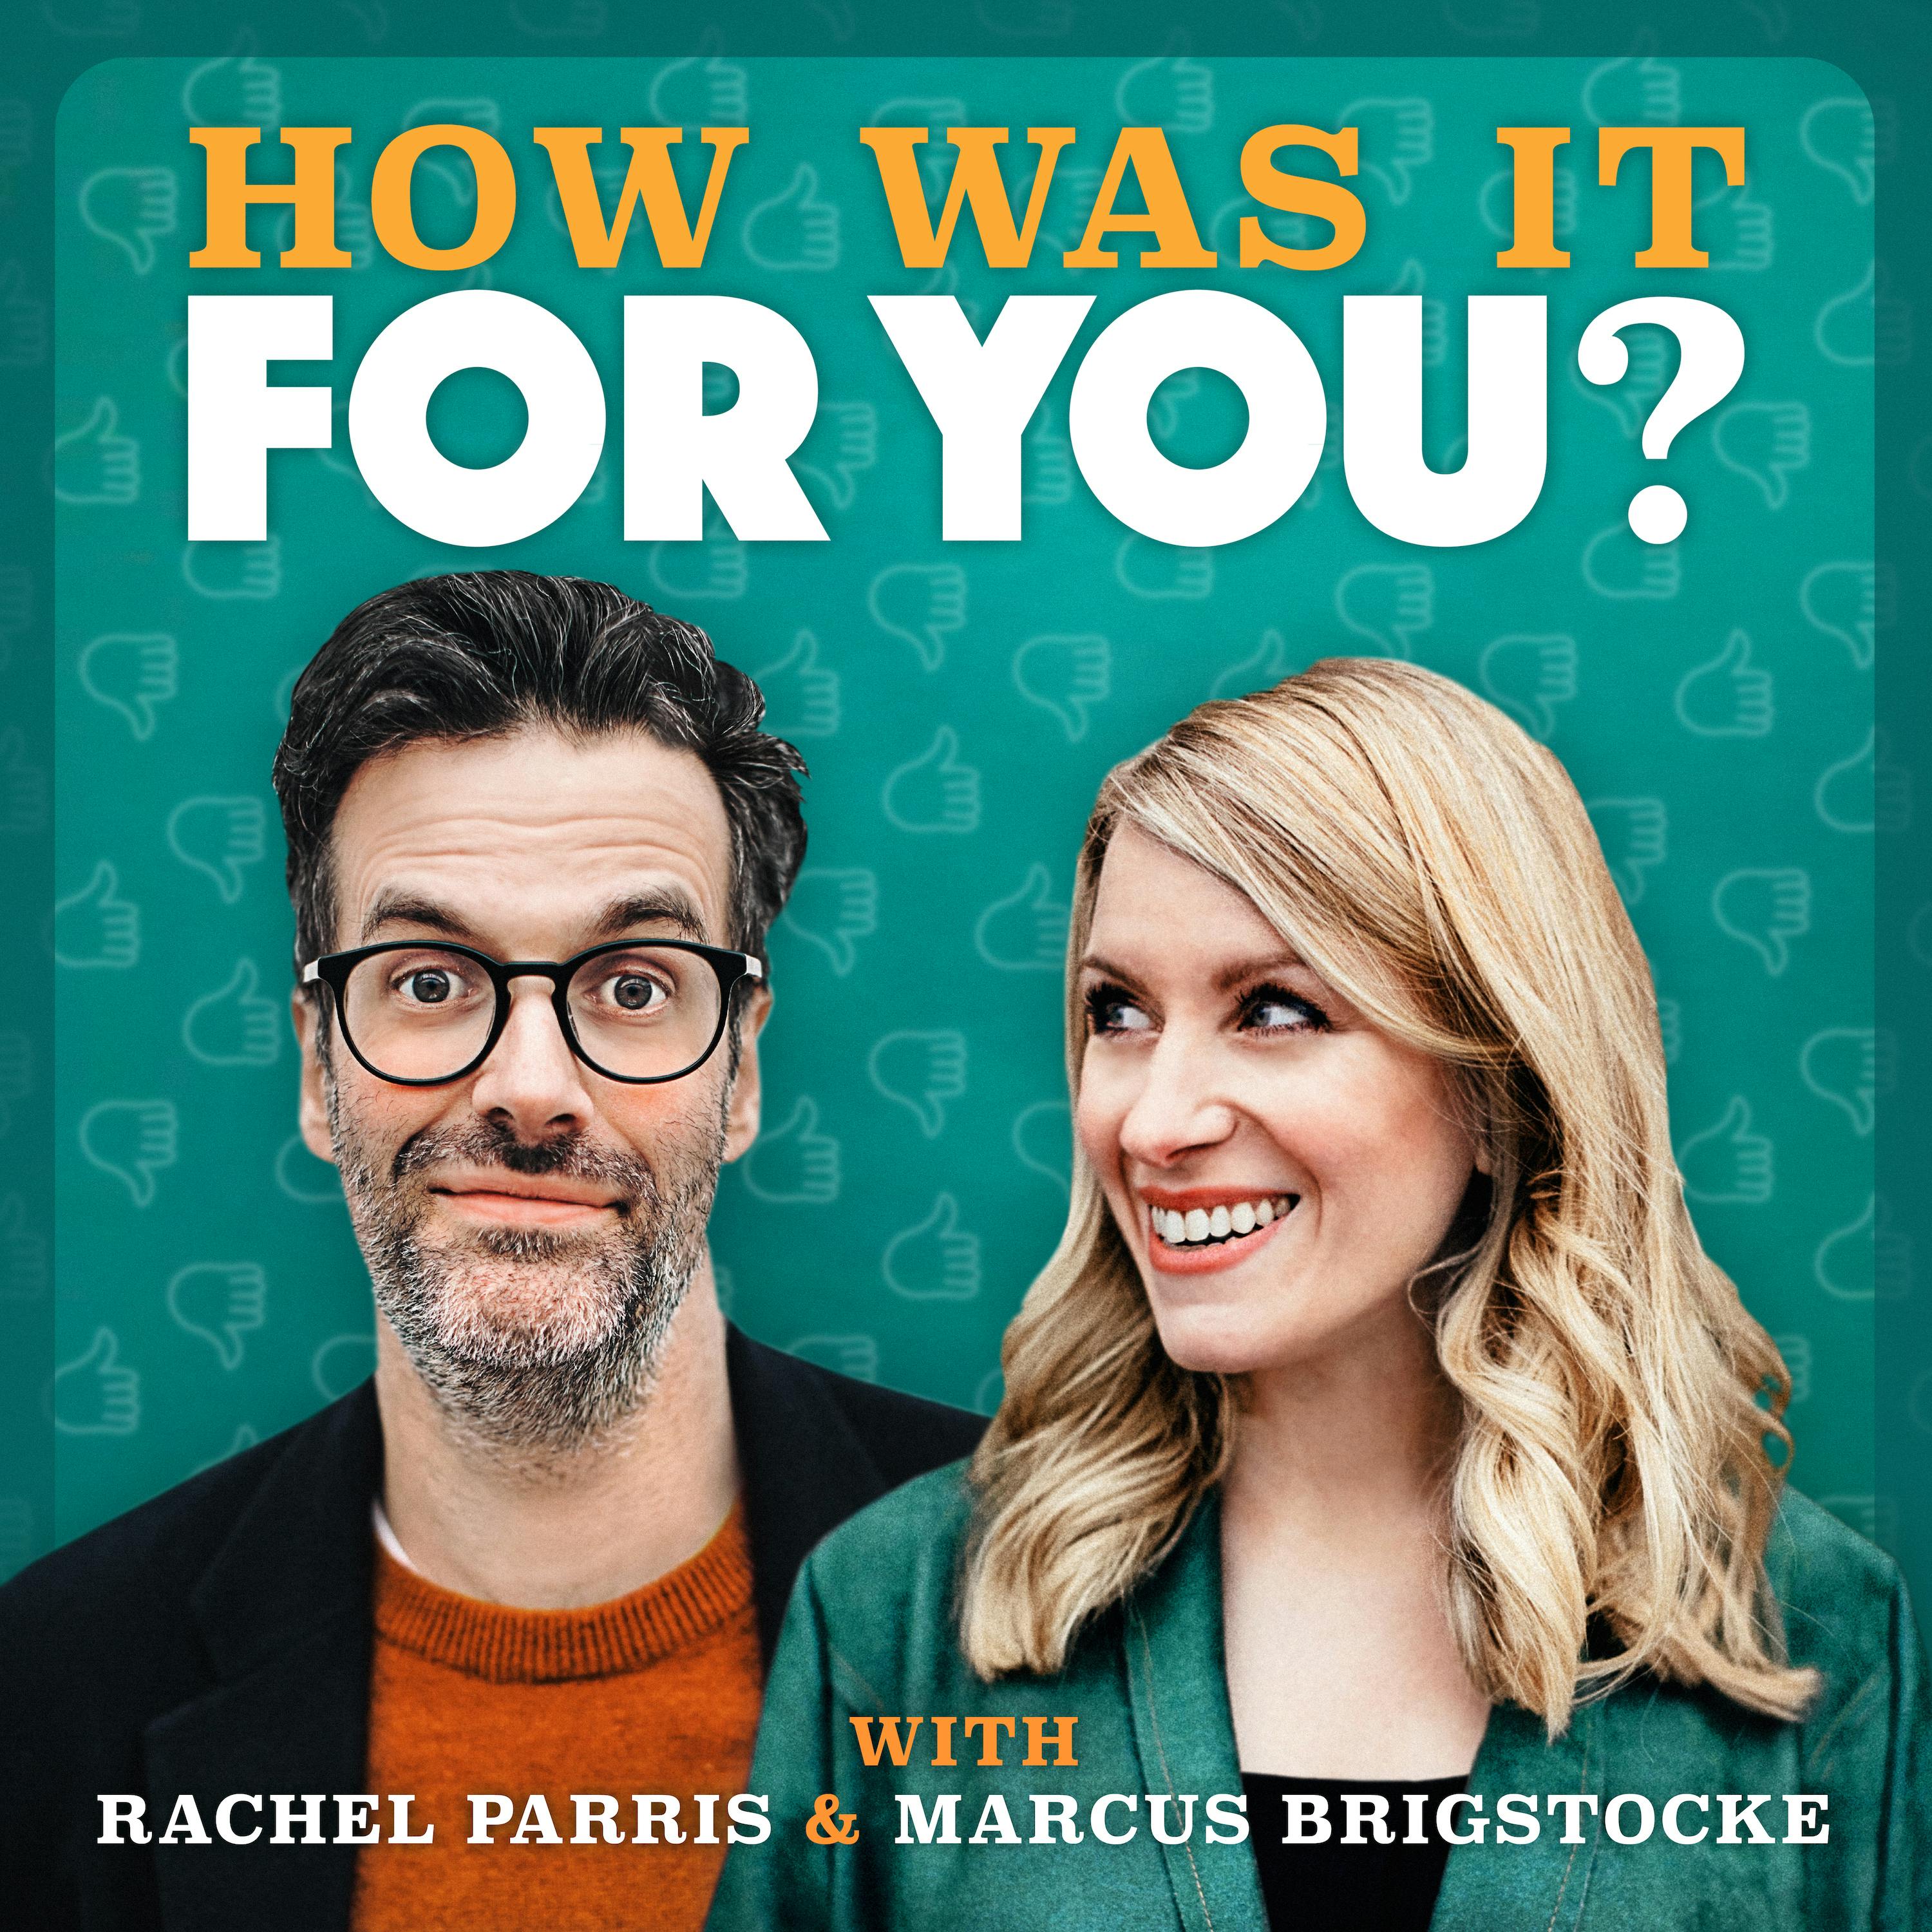 How was it for you? with Rachel Parris & Marcus Brigstocke podcast show image